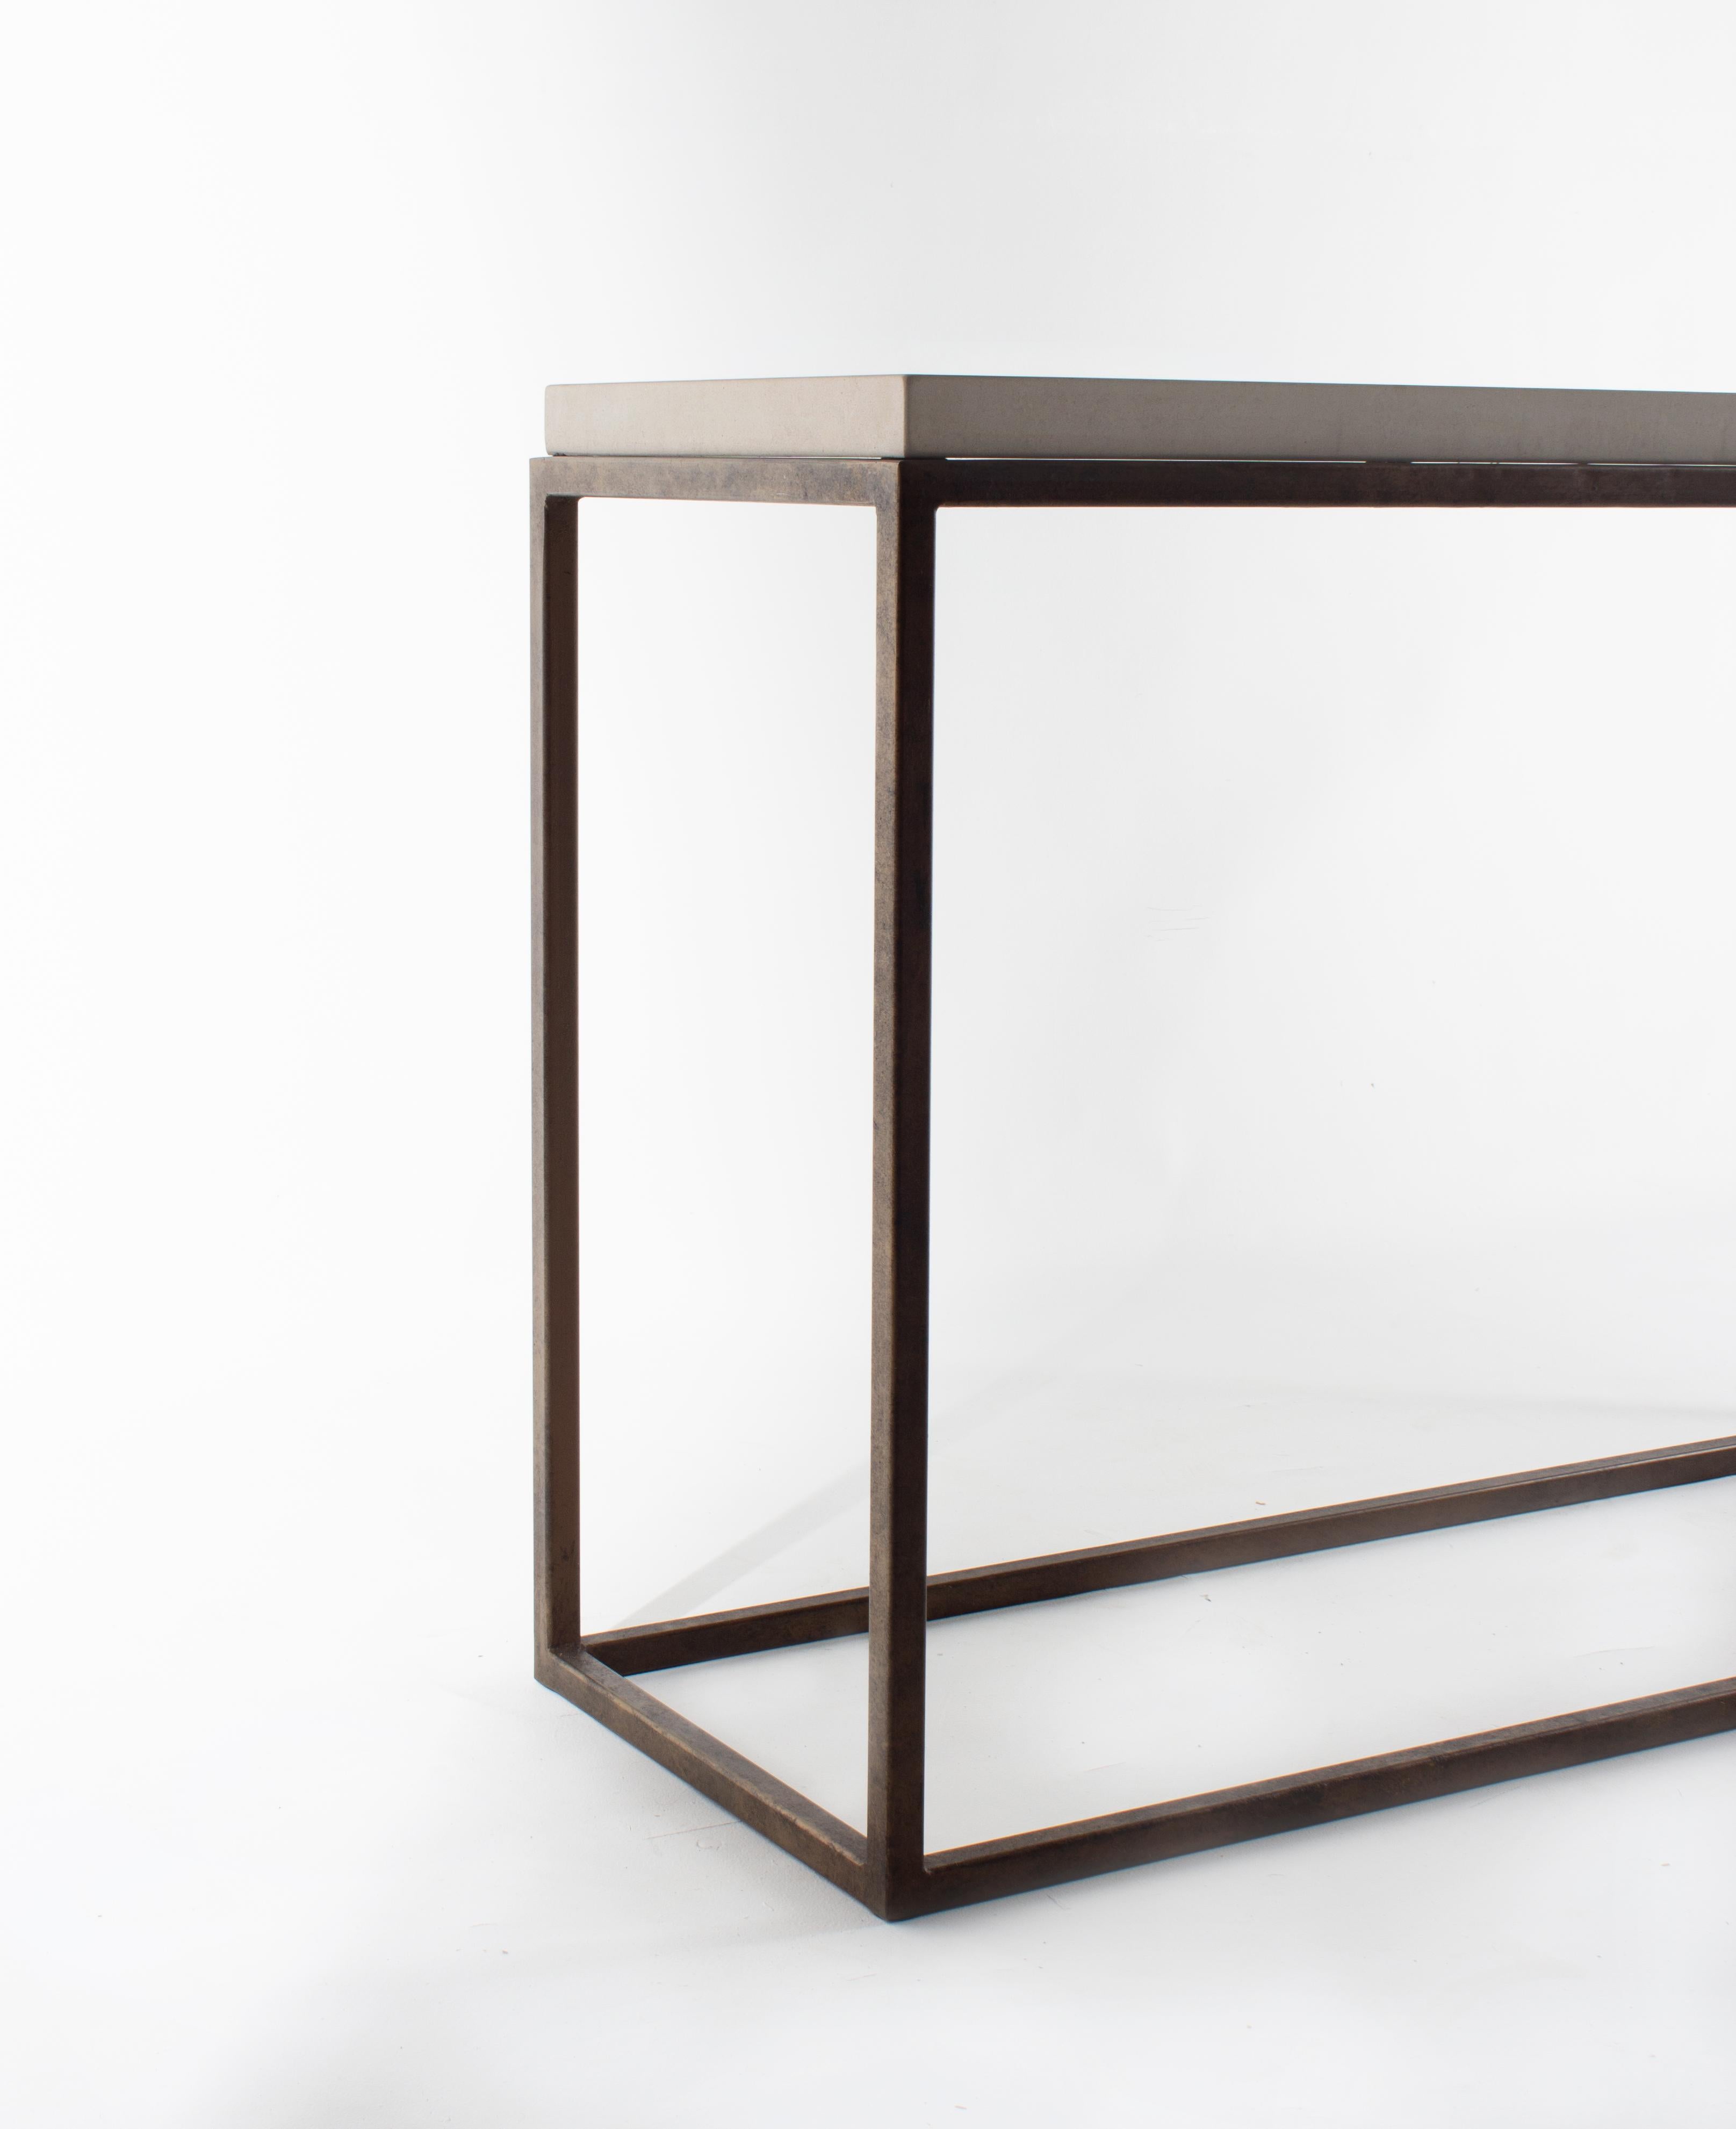 Minimalist console table with a limestone top and steel base.